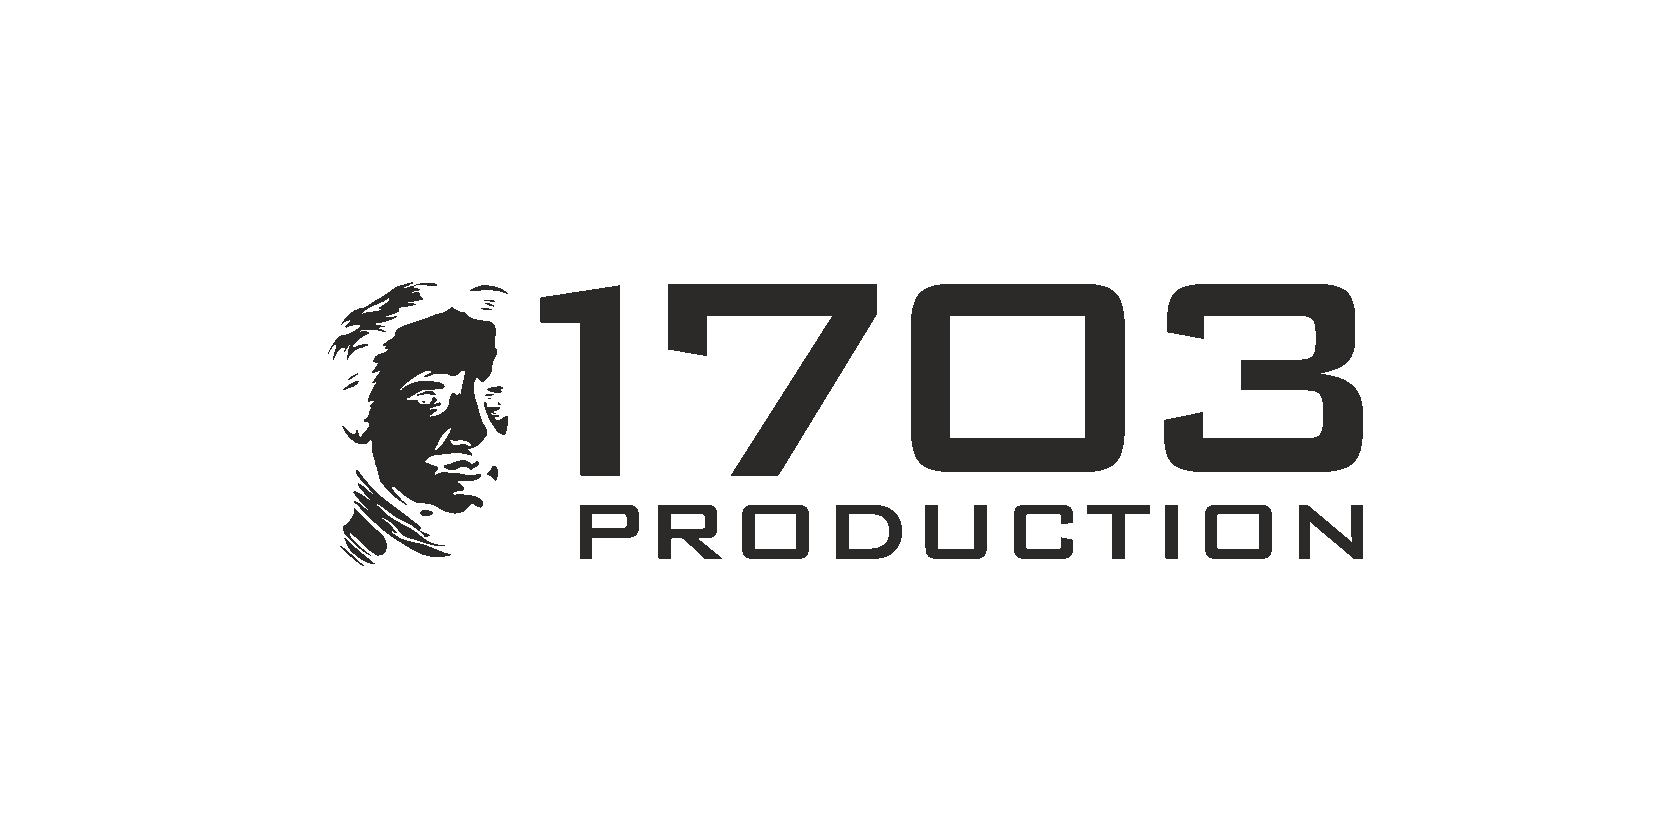 1703 PRODUCTION